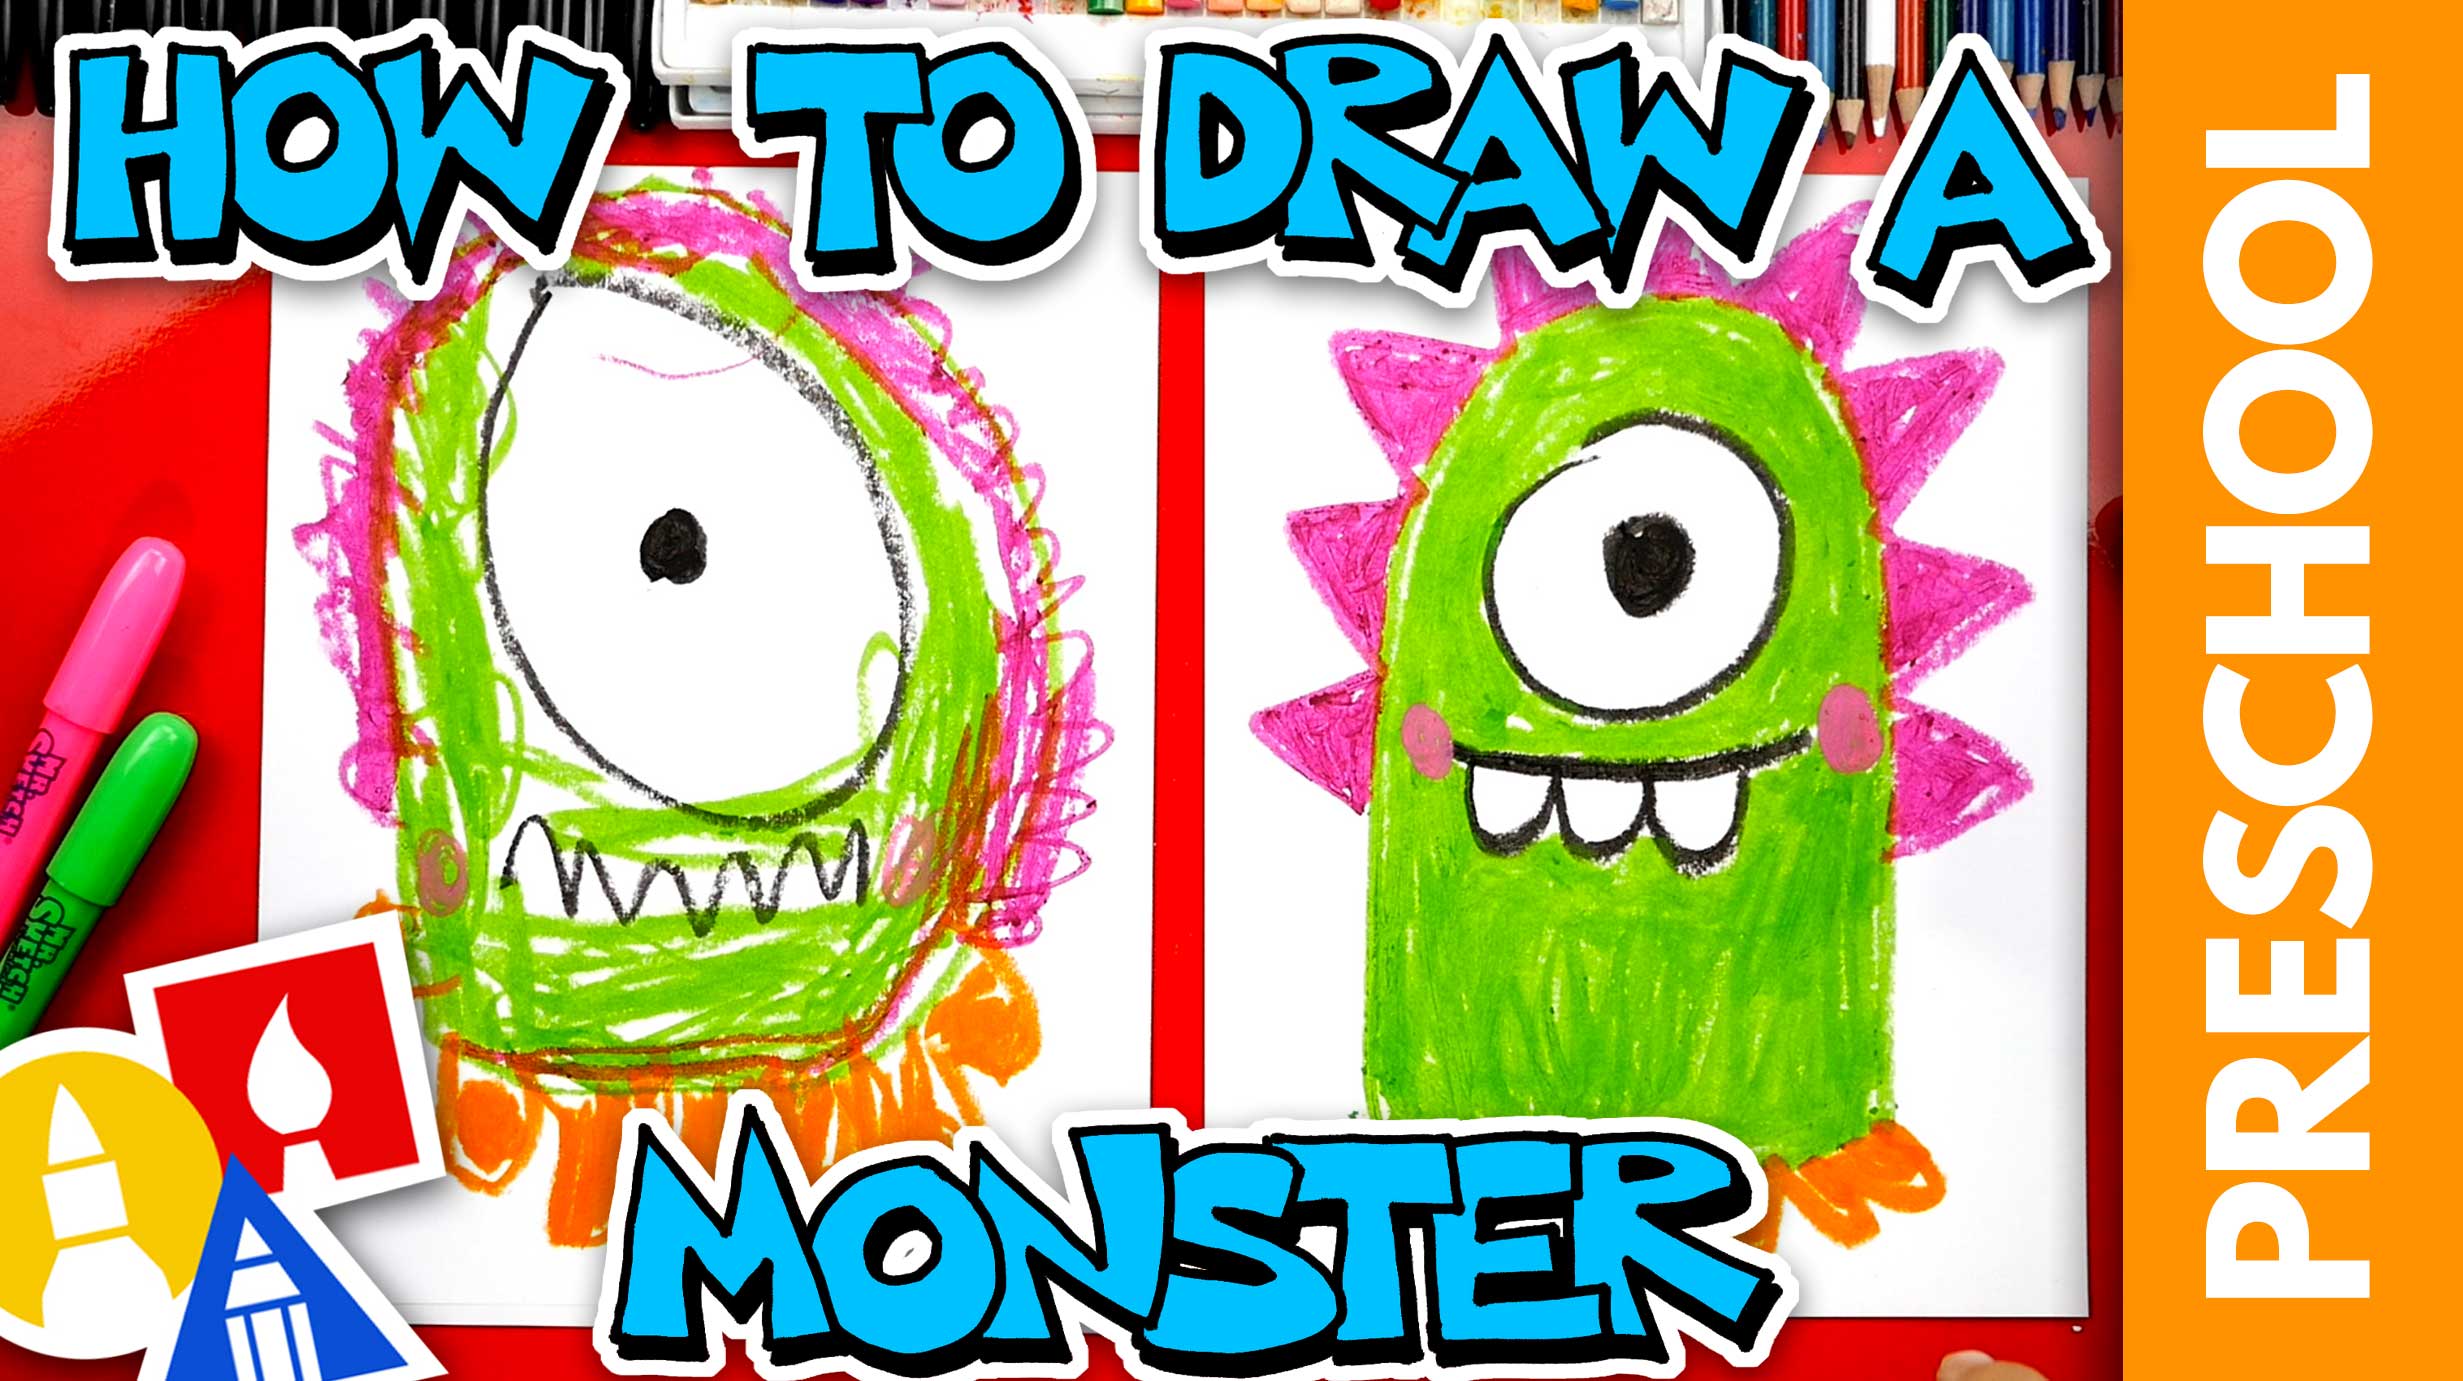 How To Draw A Funny Monster - Preschool - Art For Kids Hub